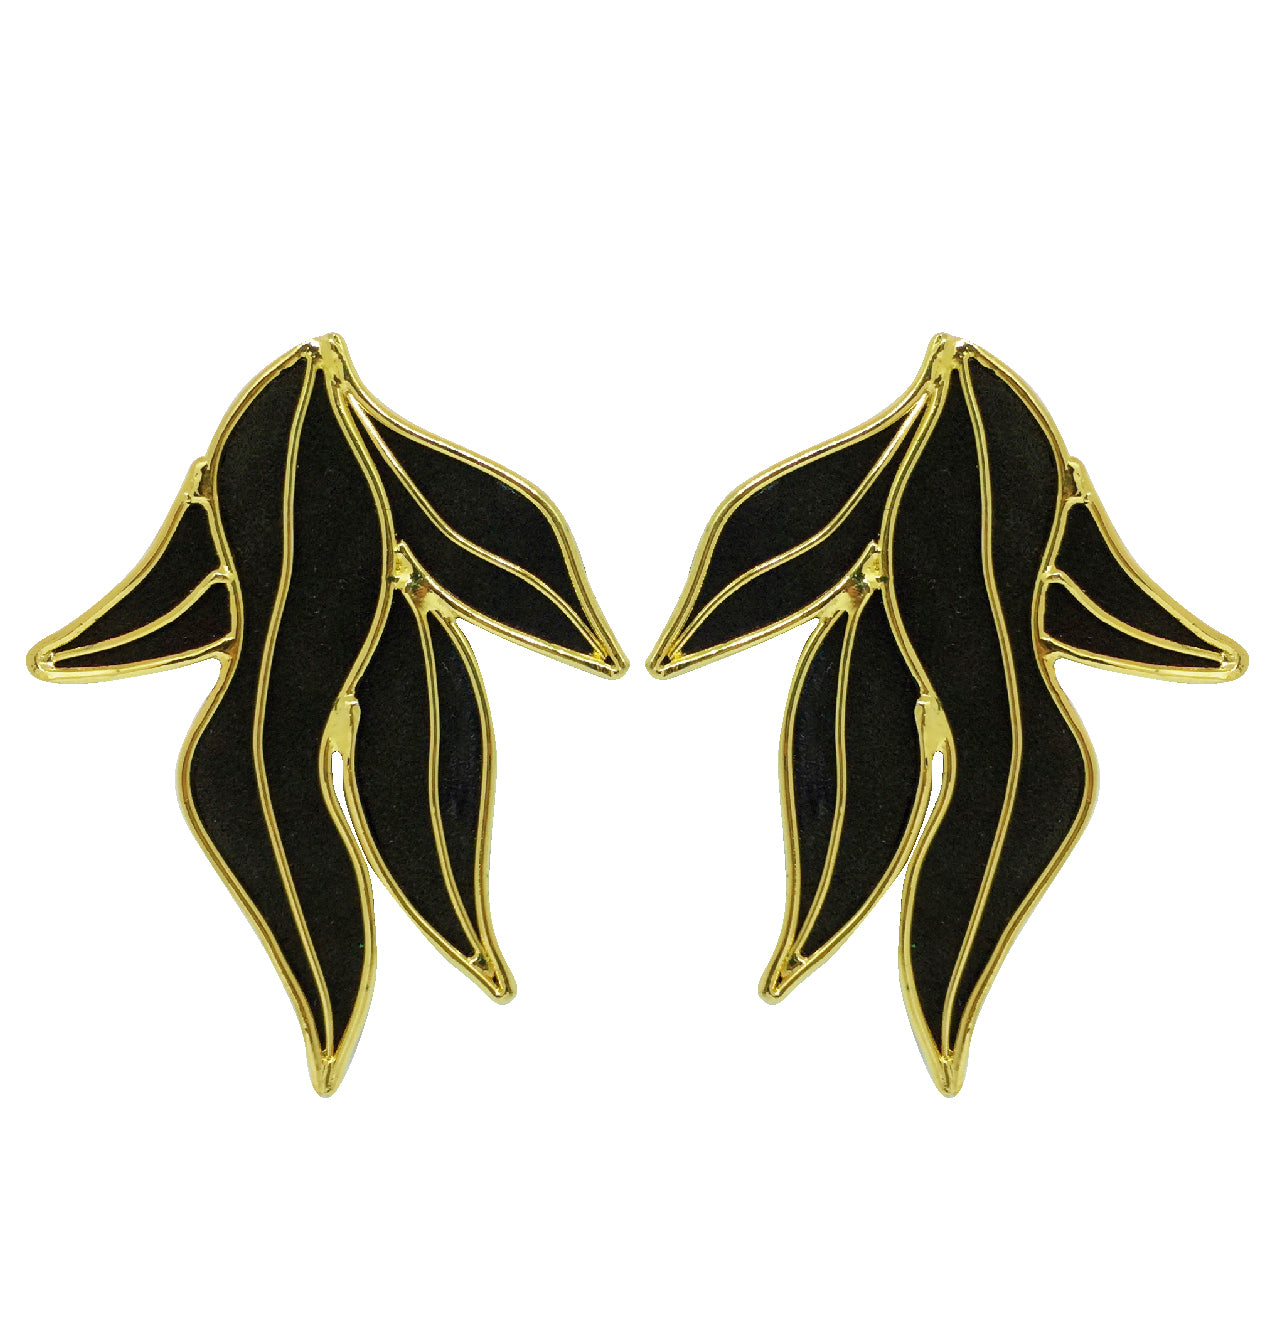 Olive Leaves Earrings by Amulettos